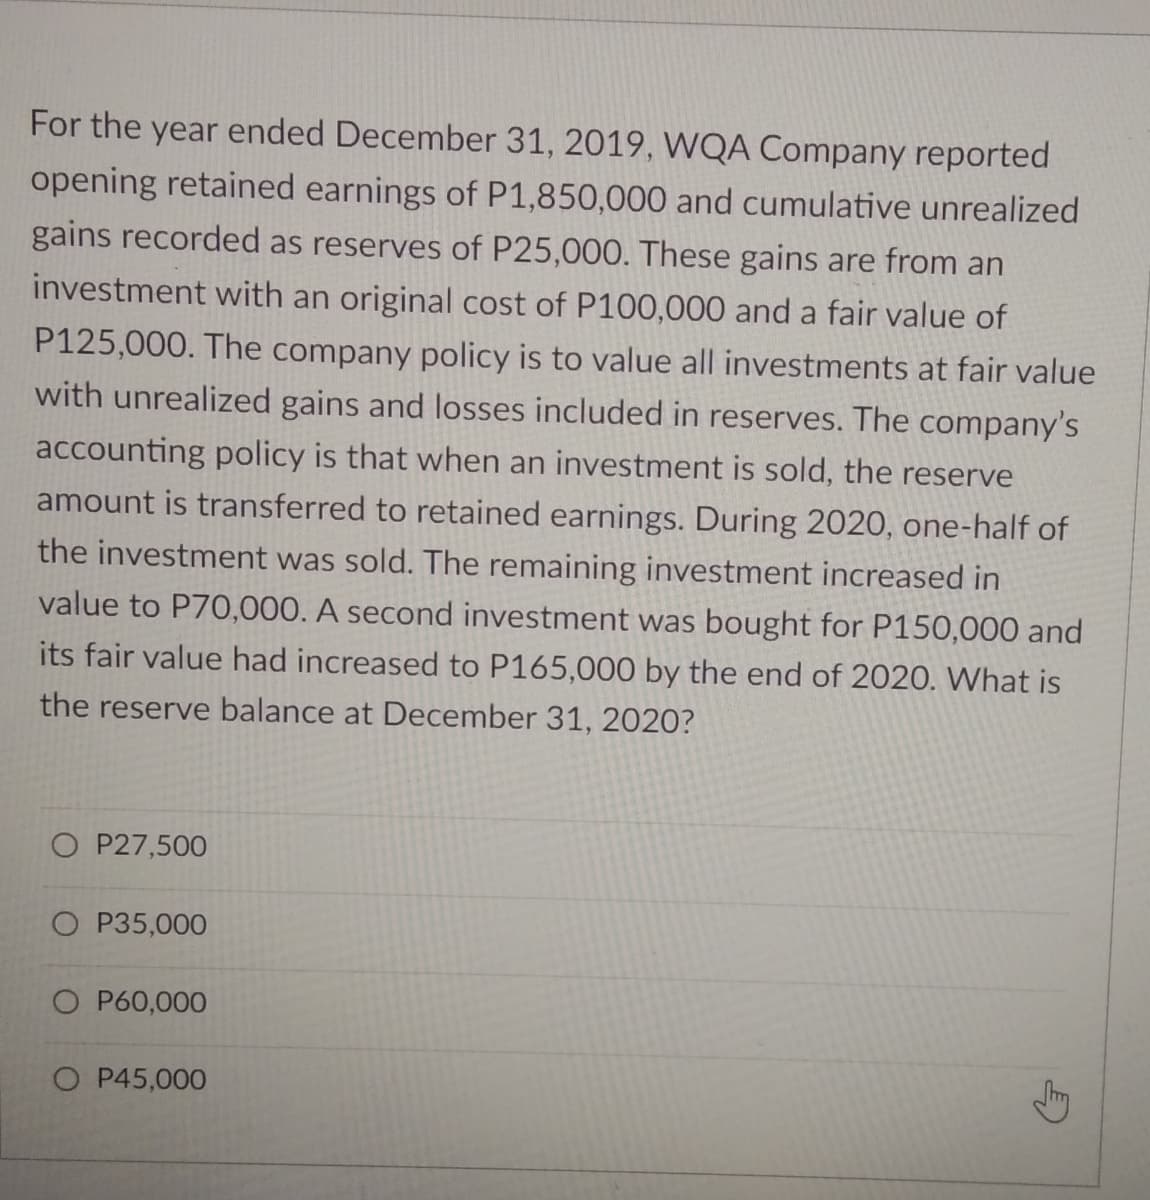 For the year ended December 31, 2019, WQA Company reported
opening retained earnings of P1,850,000 and cumulative unrealized
gains recorded as reserves of P25,000. These gains are from an
investment with an original cost of P100,000 and a fair value of
P125,000. The company policy is to value all investments at fair value
with unrealized gains and losses included in reserves. The company's
accounting policy is that when an investment is sold, the reserve
amount is transferred to retained earnings. During 2020, one-half of
the investment was sold. The remaining investment increased in
value to P70,000. A second investment was bought for P150,000 and
its fair value had increased to P165,000 by the end of 2020. What is
the reserve balance at December 31, 2020?
O P27,500
O P35,000
O P60,000
O P45,000
